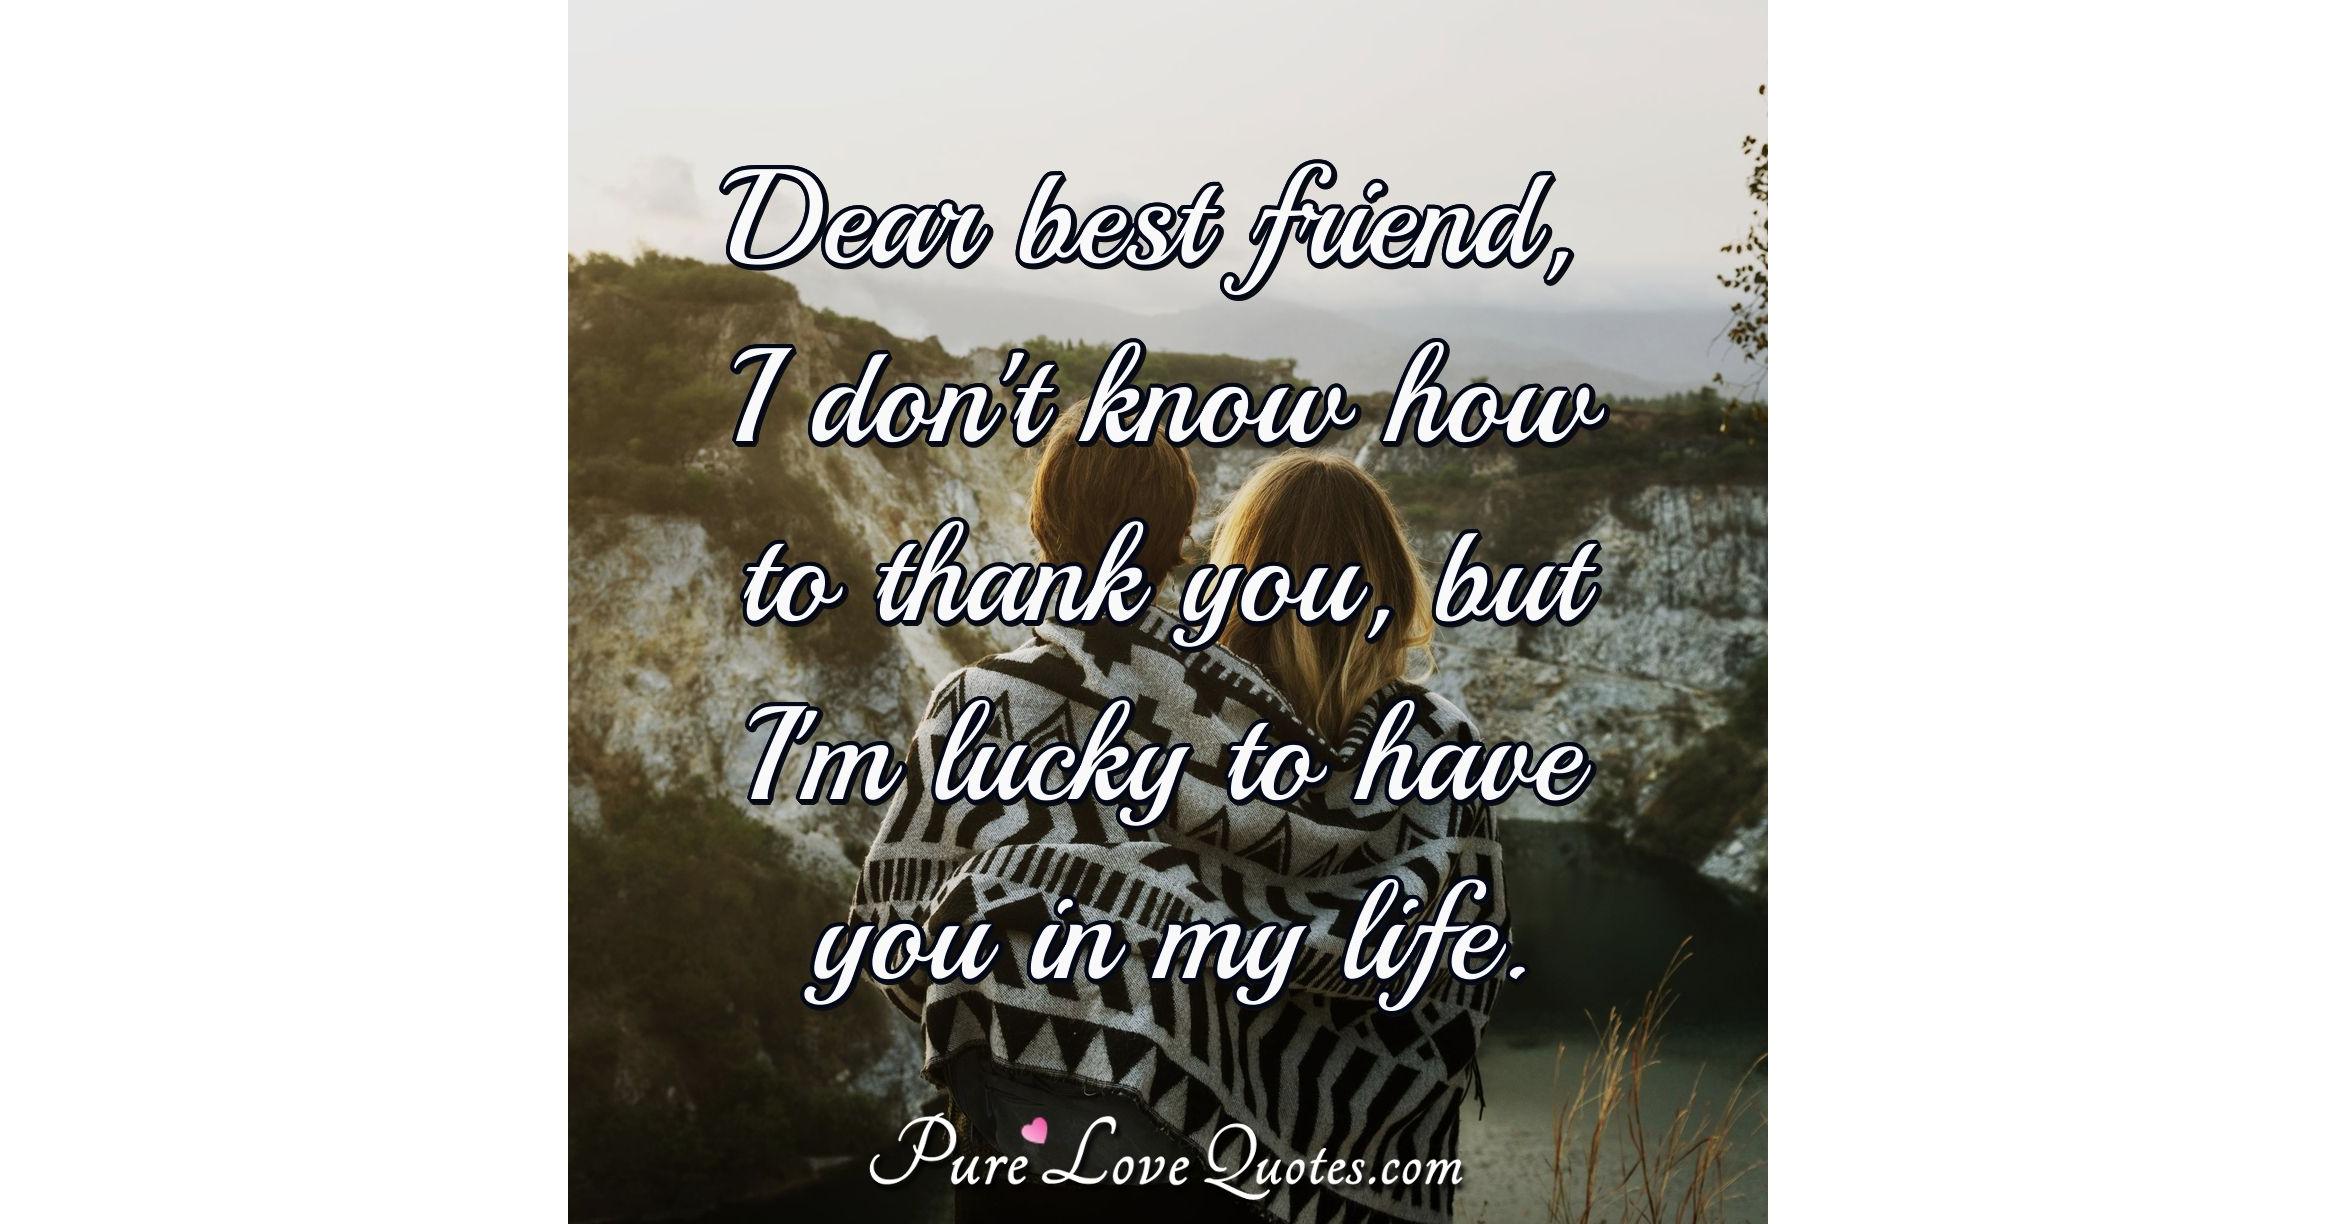 Dear best friend, I don't know how to thank you, but I'm lucky to have